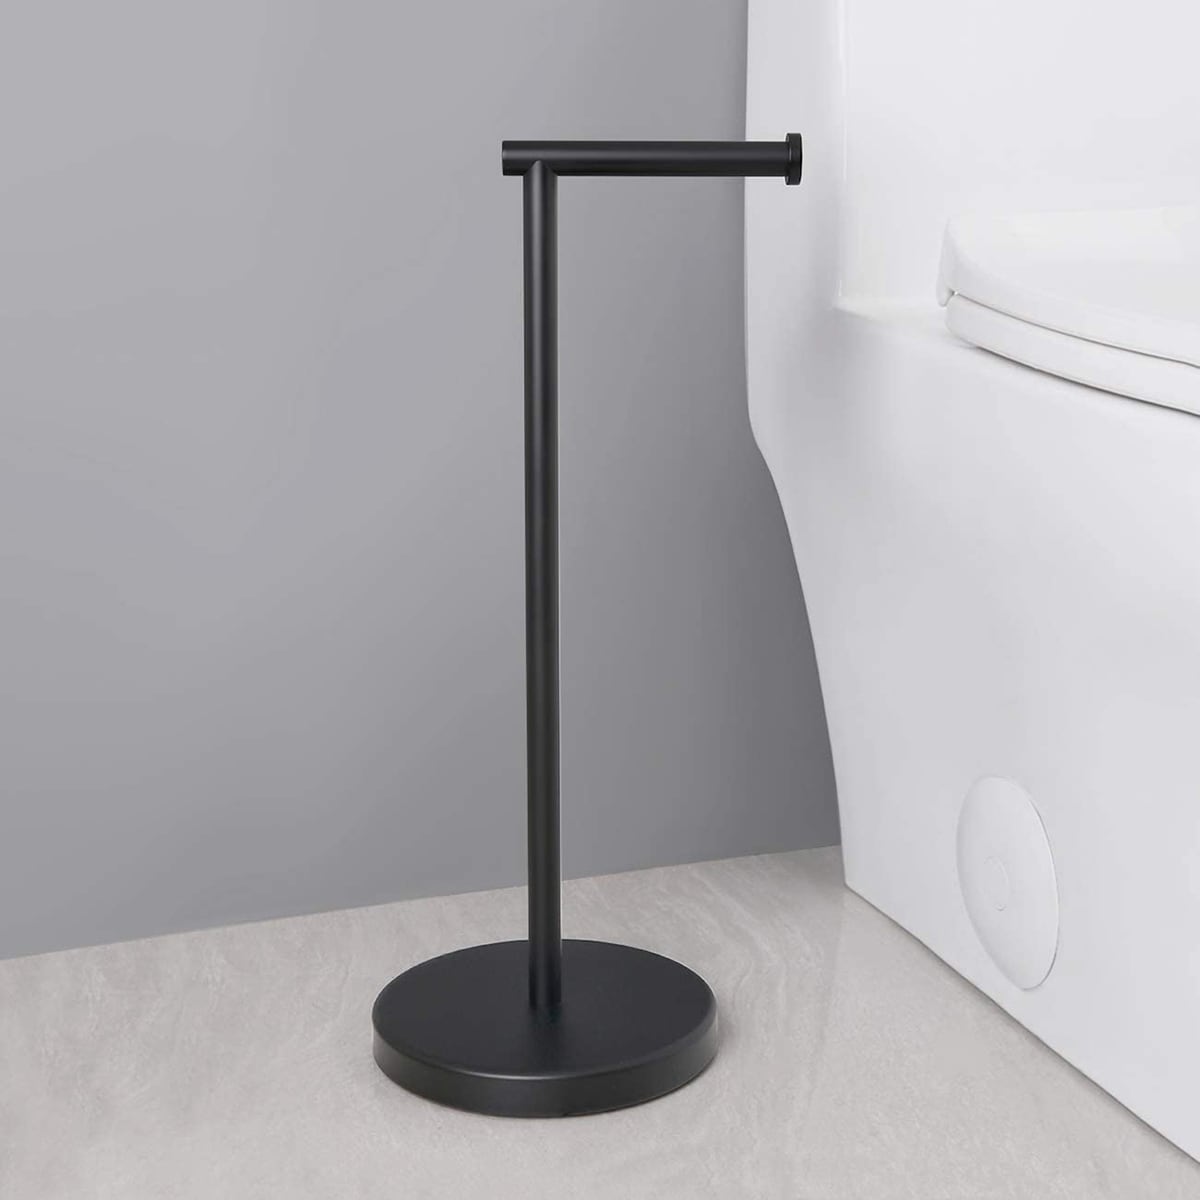 https://ak1.ostkcdn.com/images/products/is/images/direct/3292f43b1120087f2e5a9be9fa96fd70fcbd31e6/Freestanding-Toilet-Paper-Holder.jpg